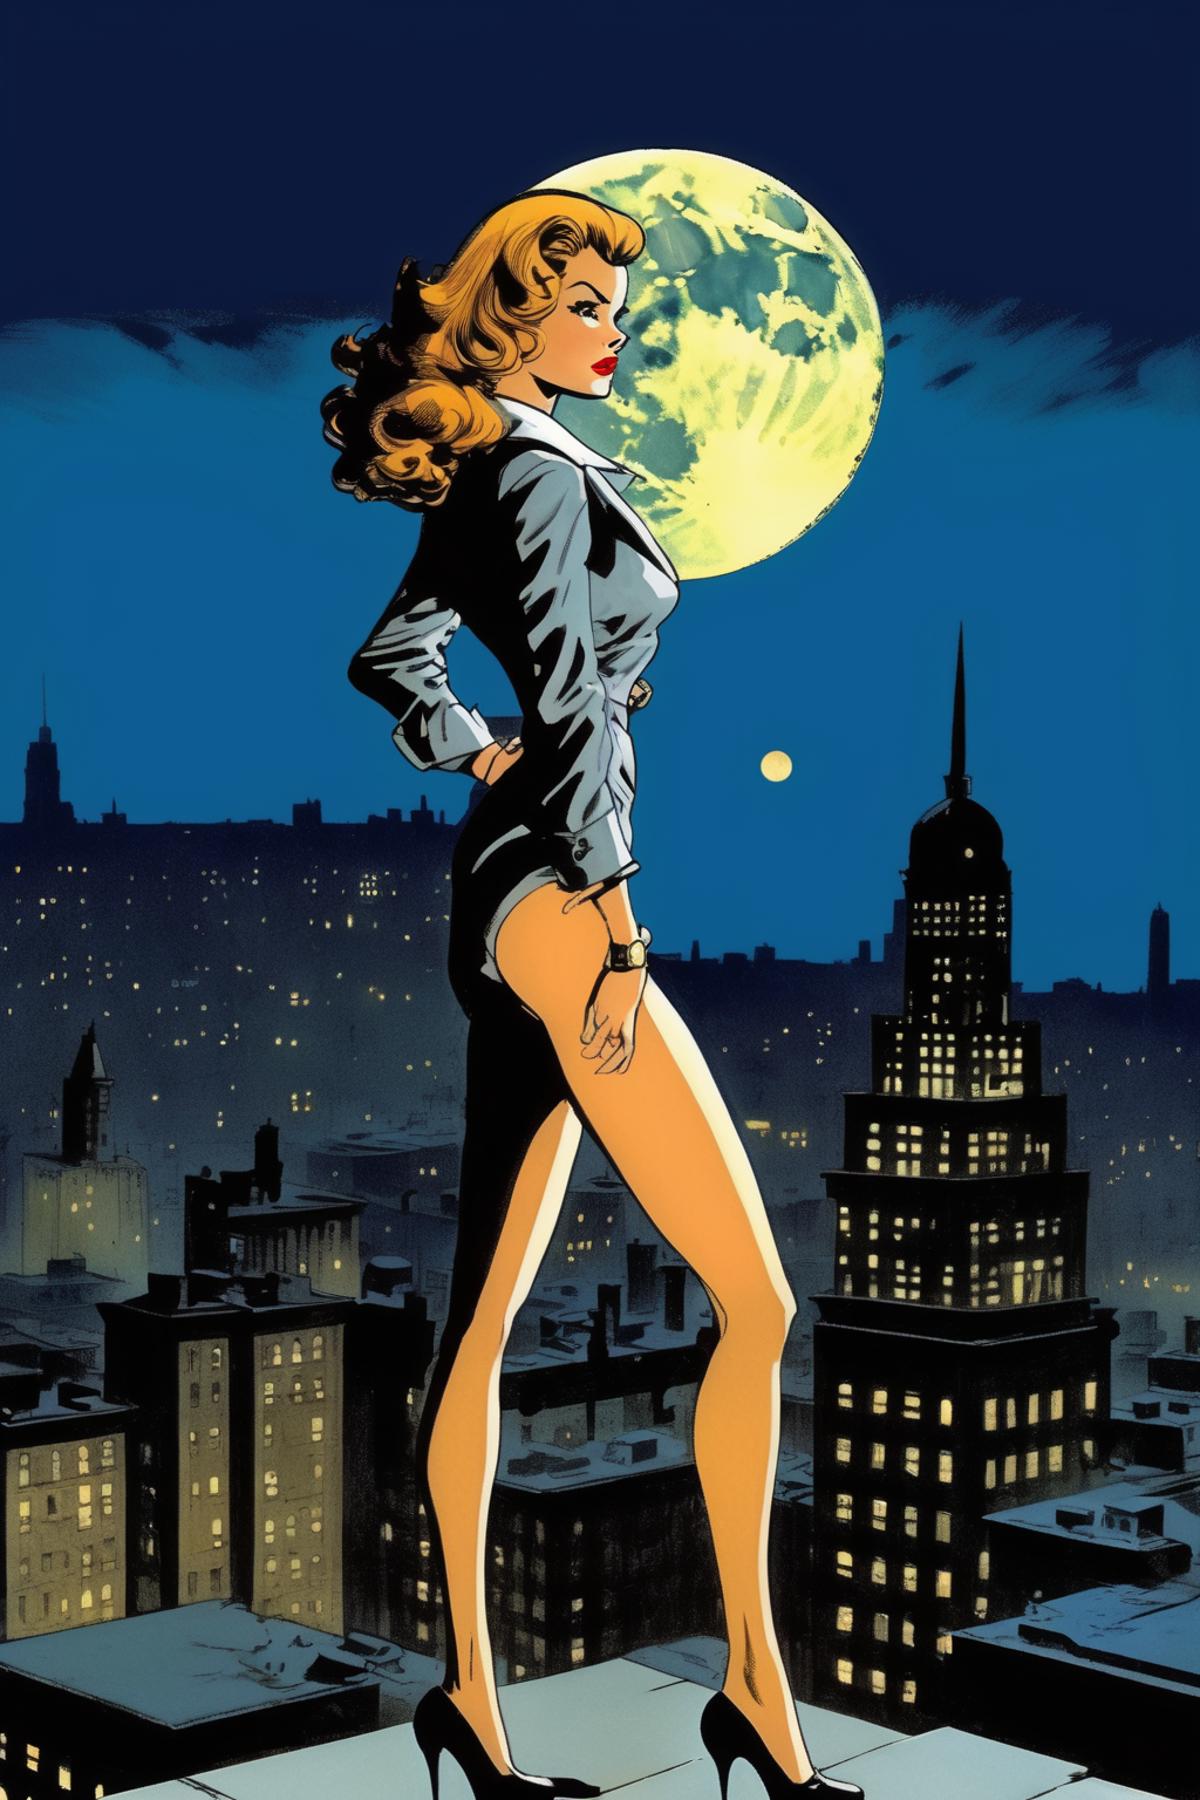 Will Eisner Style image by Kappa_Neuro